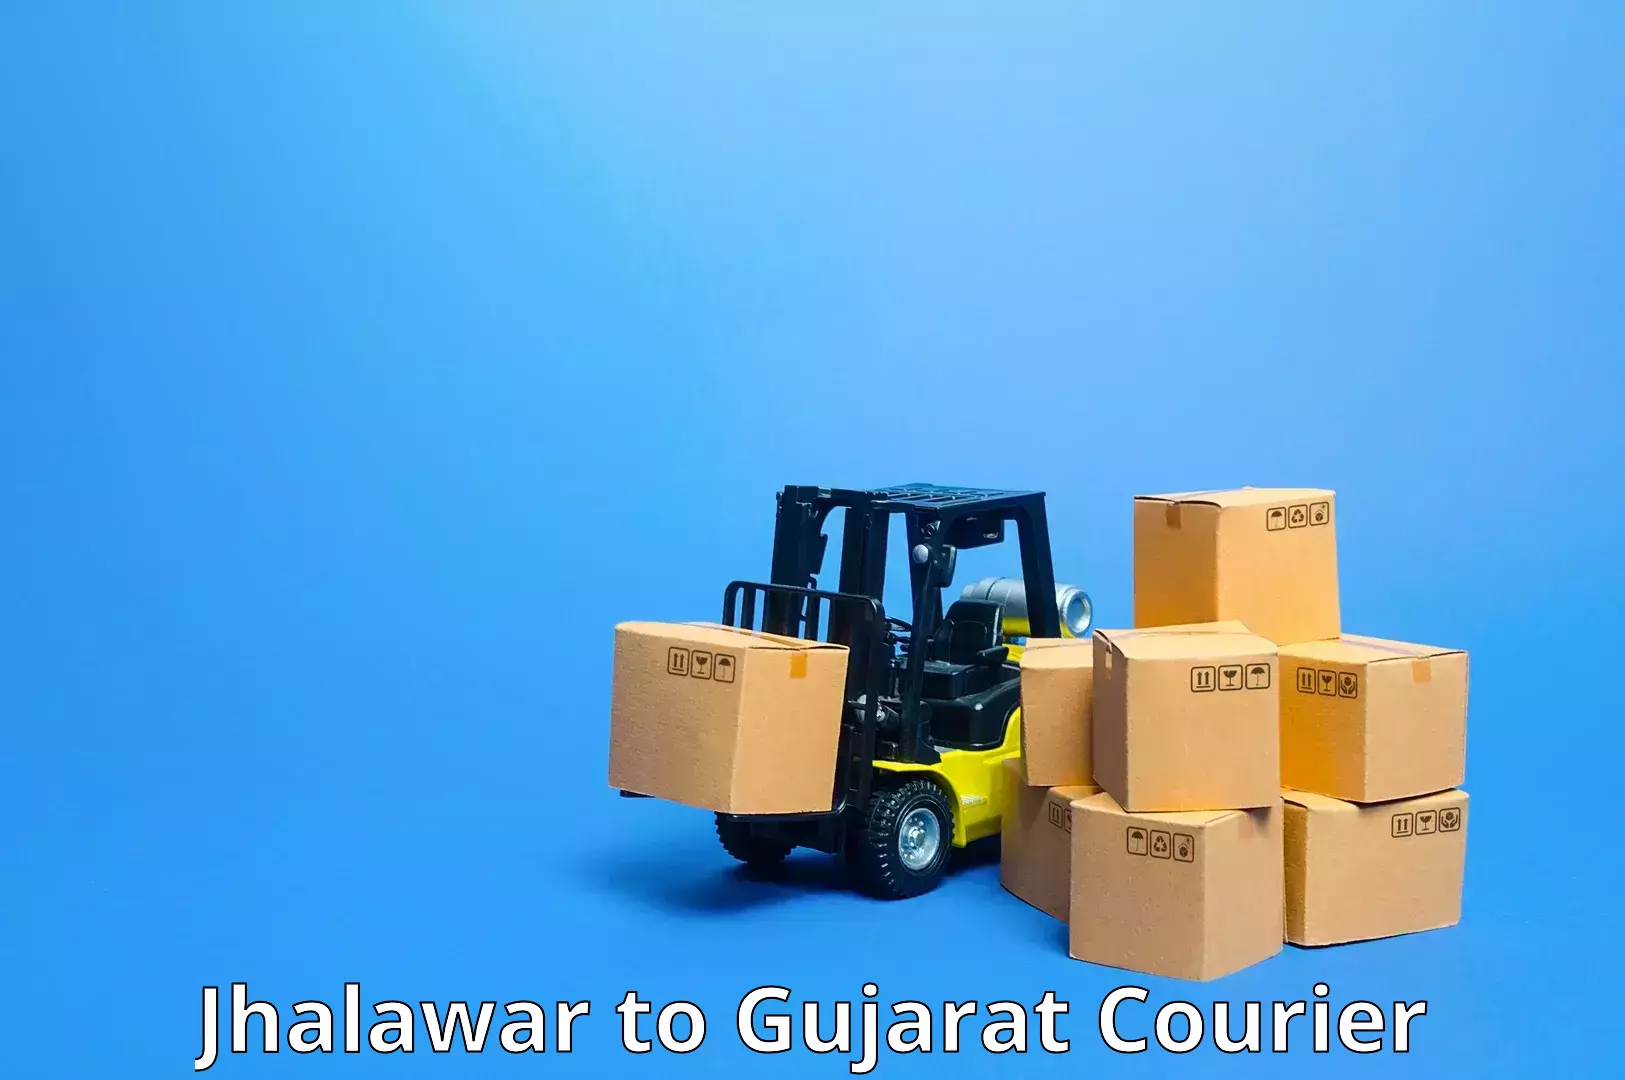 Reliable parcel services Jhalawar to Ahmedabad